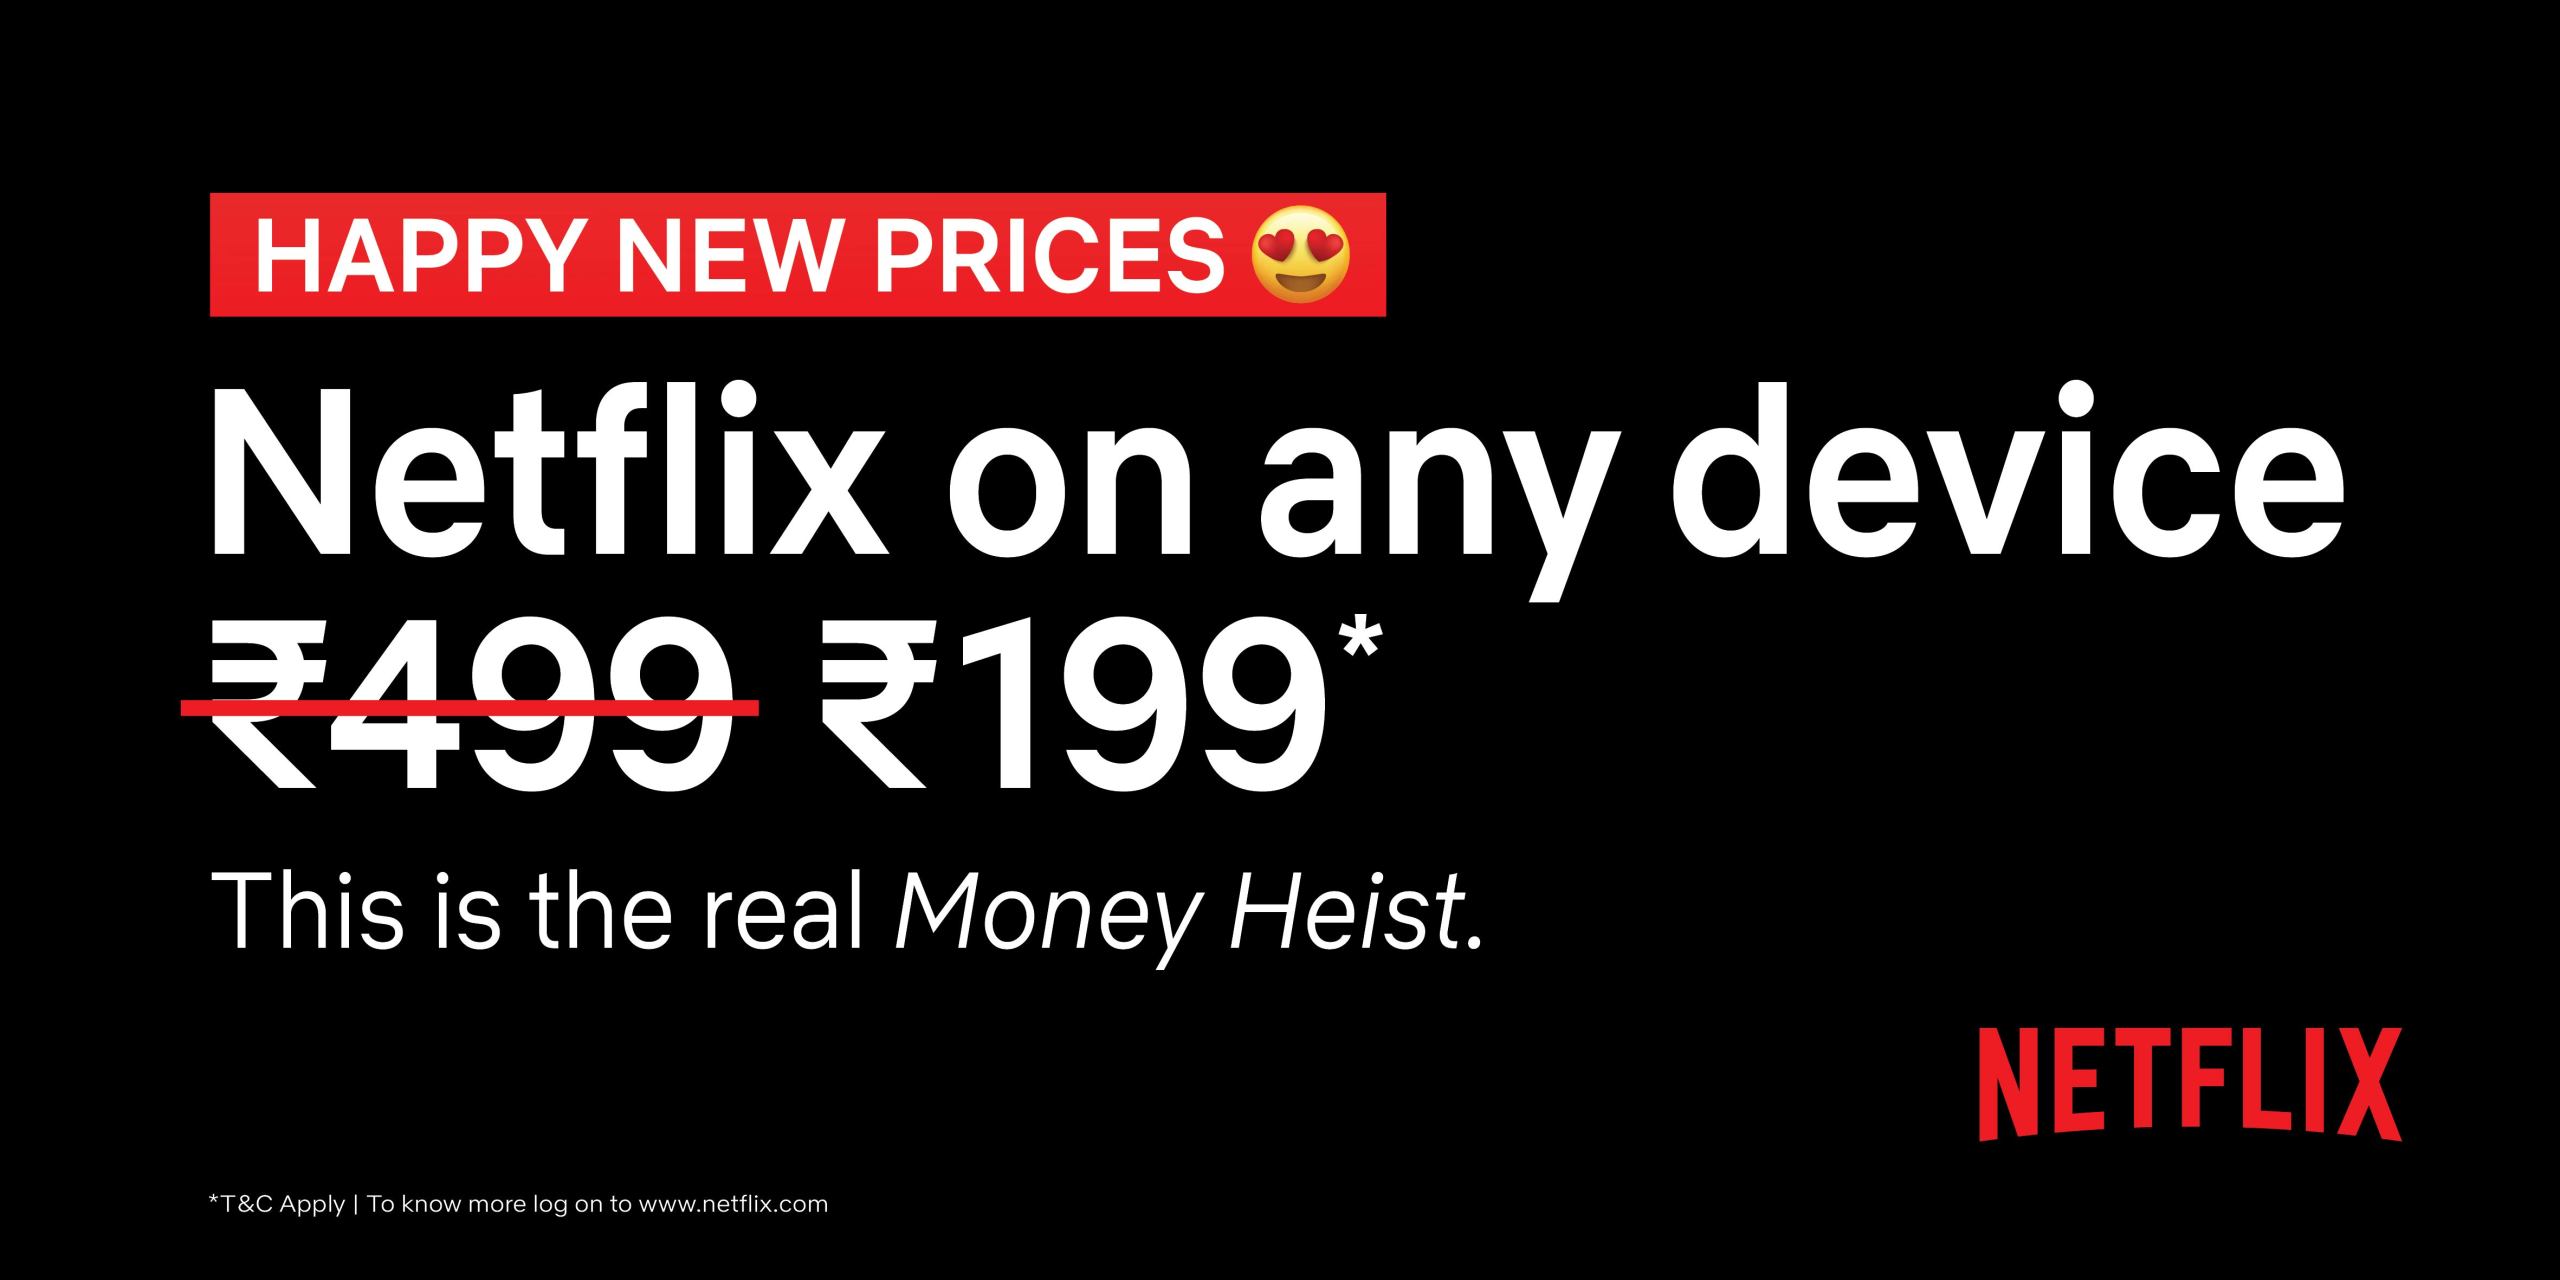 Netflix For All. Now At Happy New Prices.